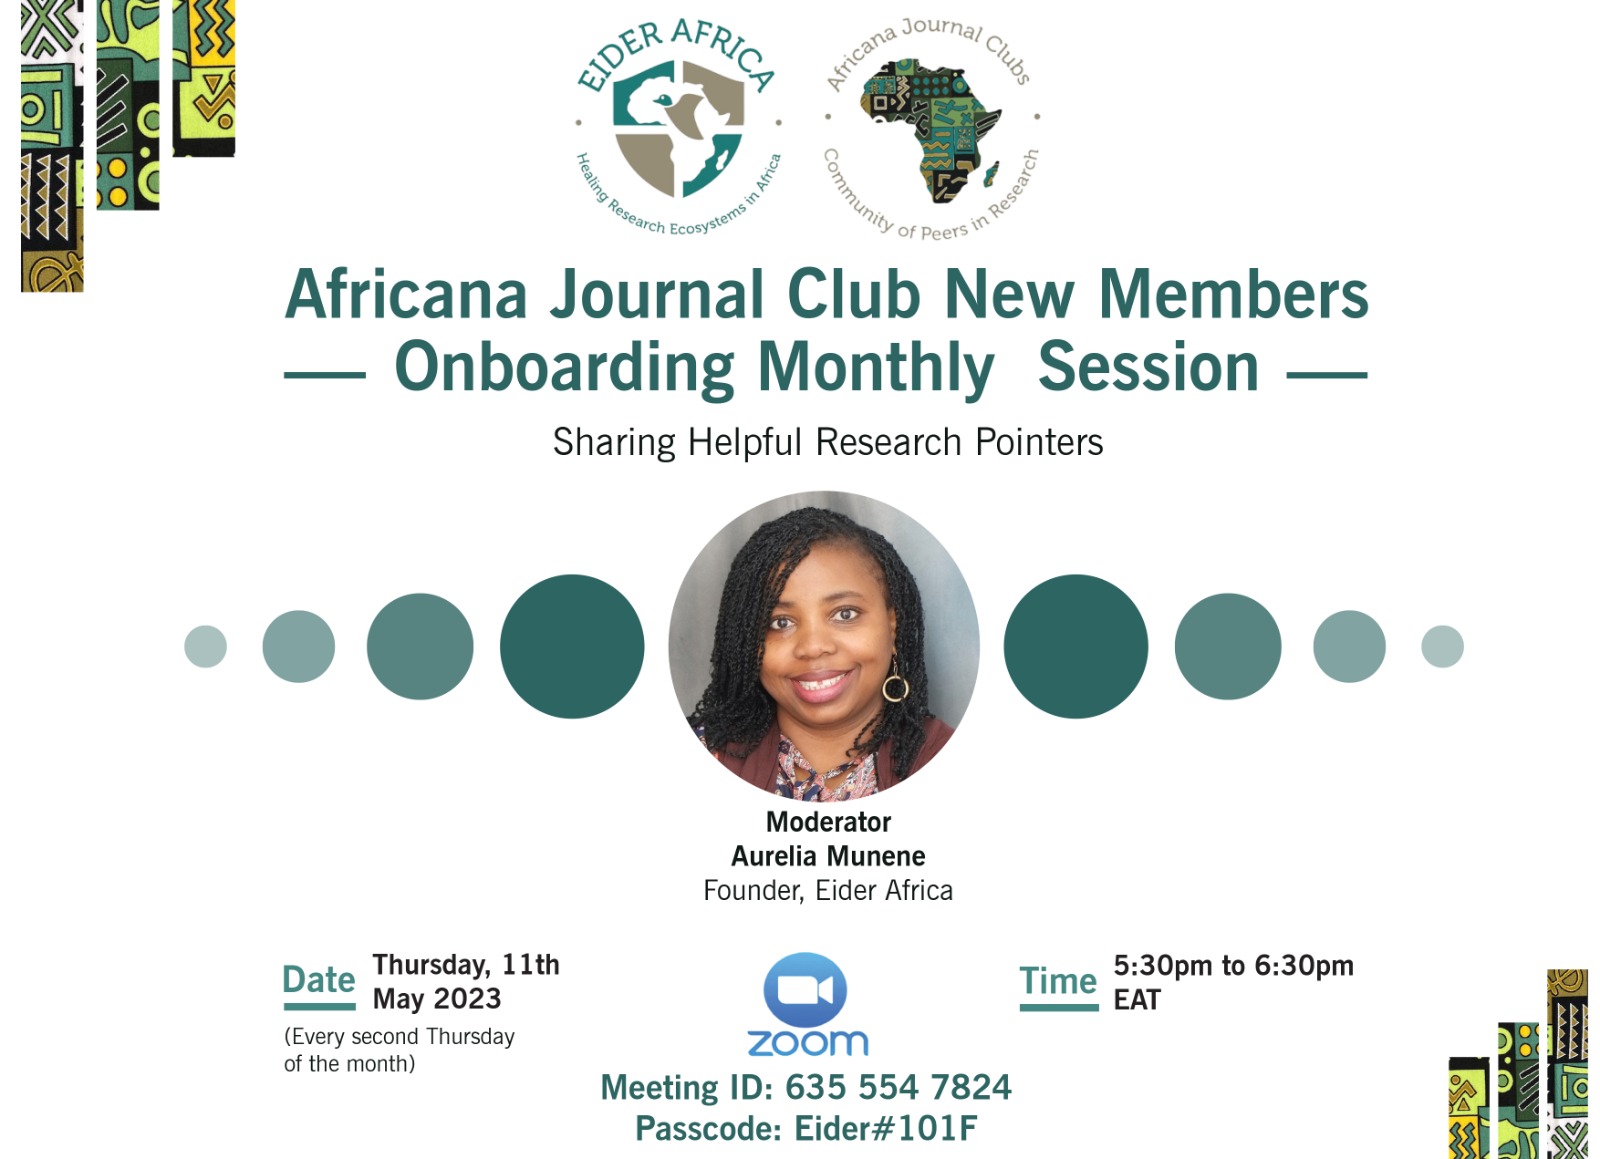 AJC New Members Onborading Monthly Session